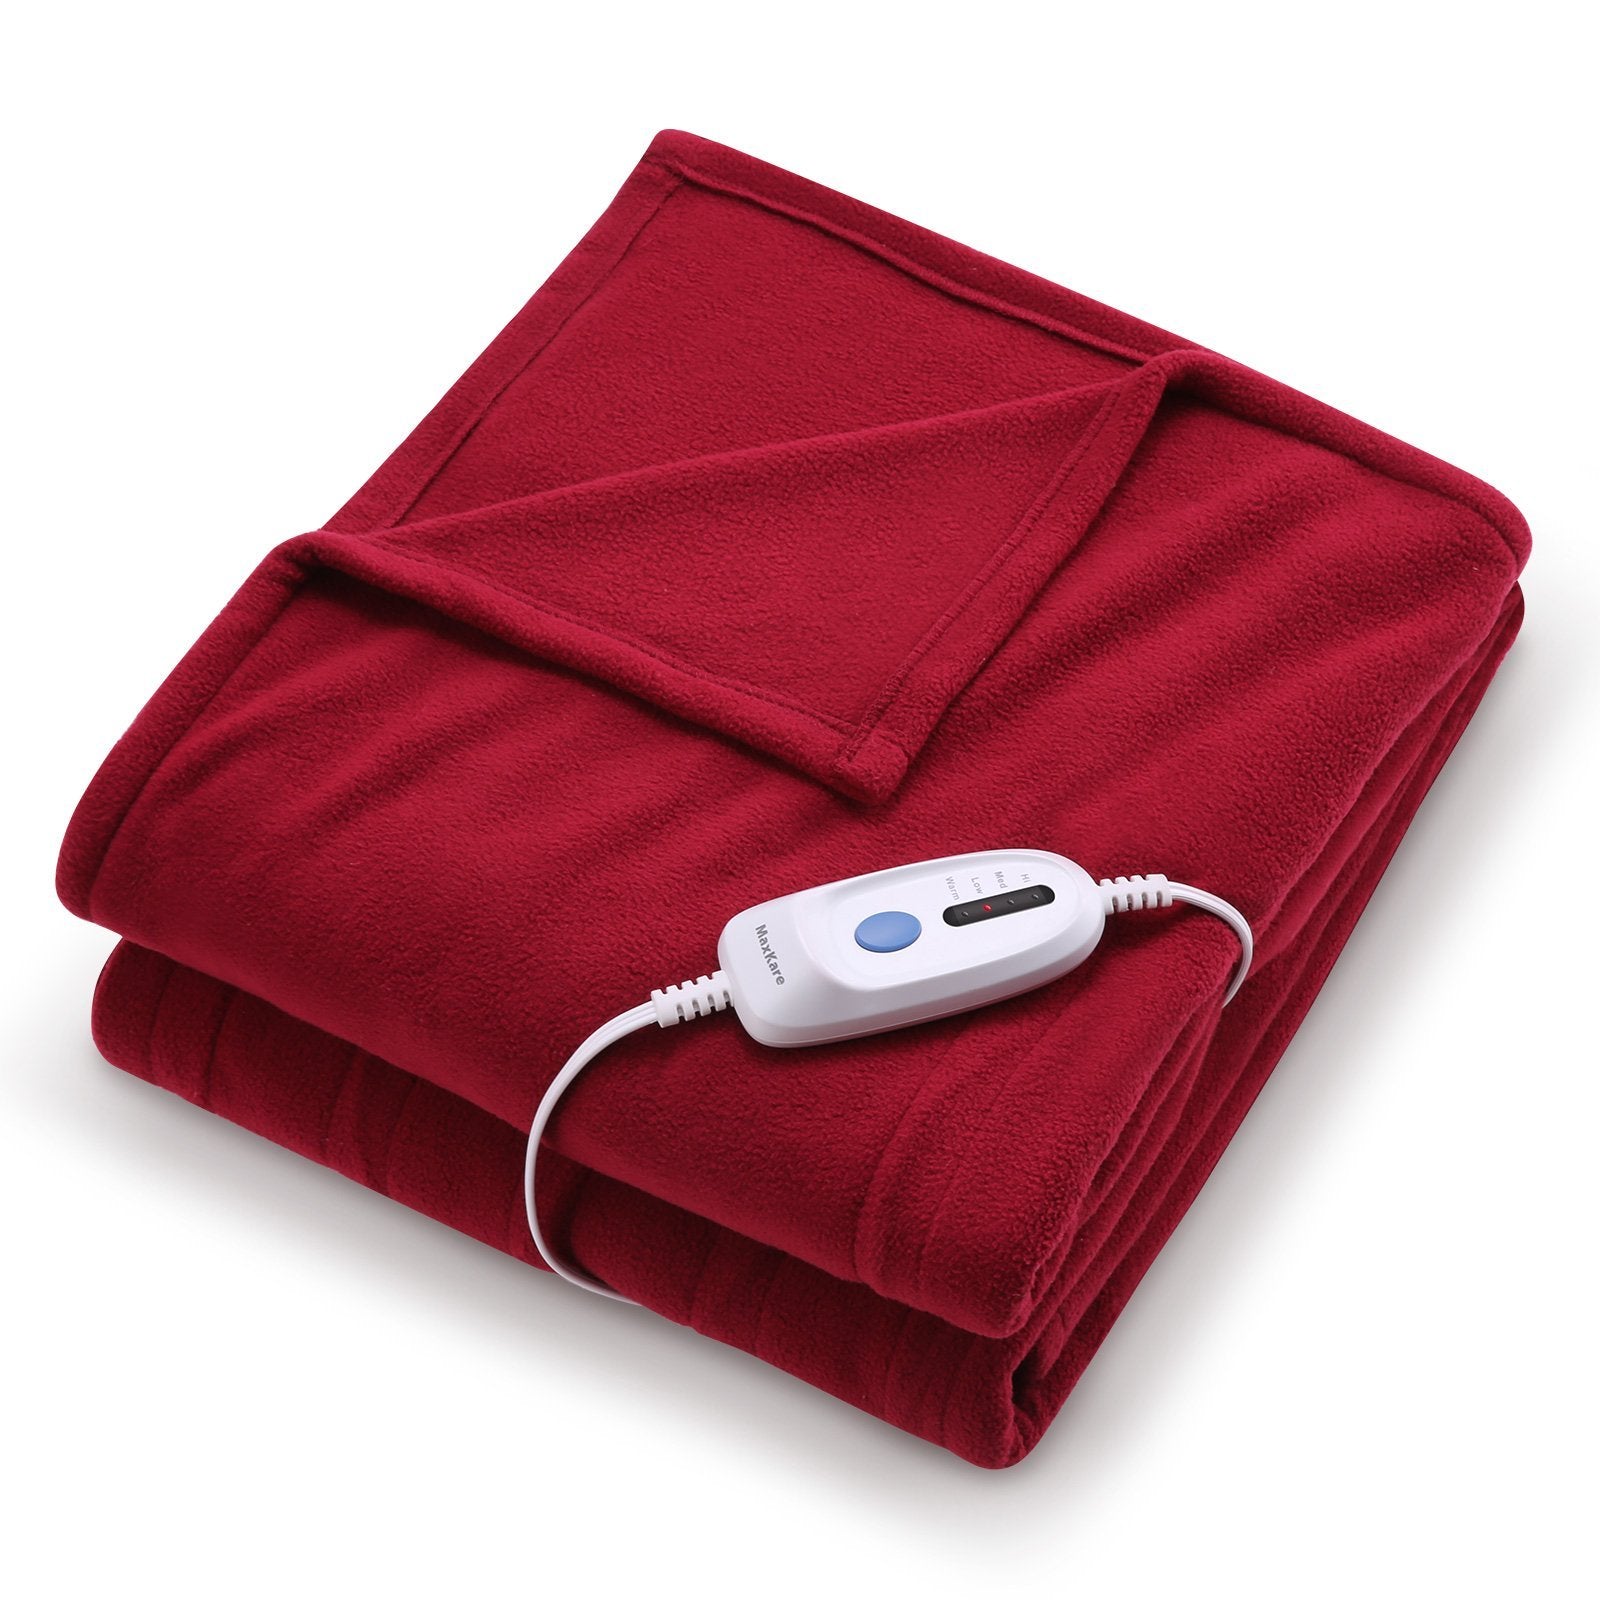 Gymax 62 in. x 84 in. Heated Electric Blanket Timer Blue Twin Size